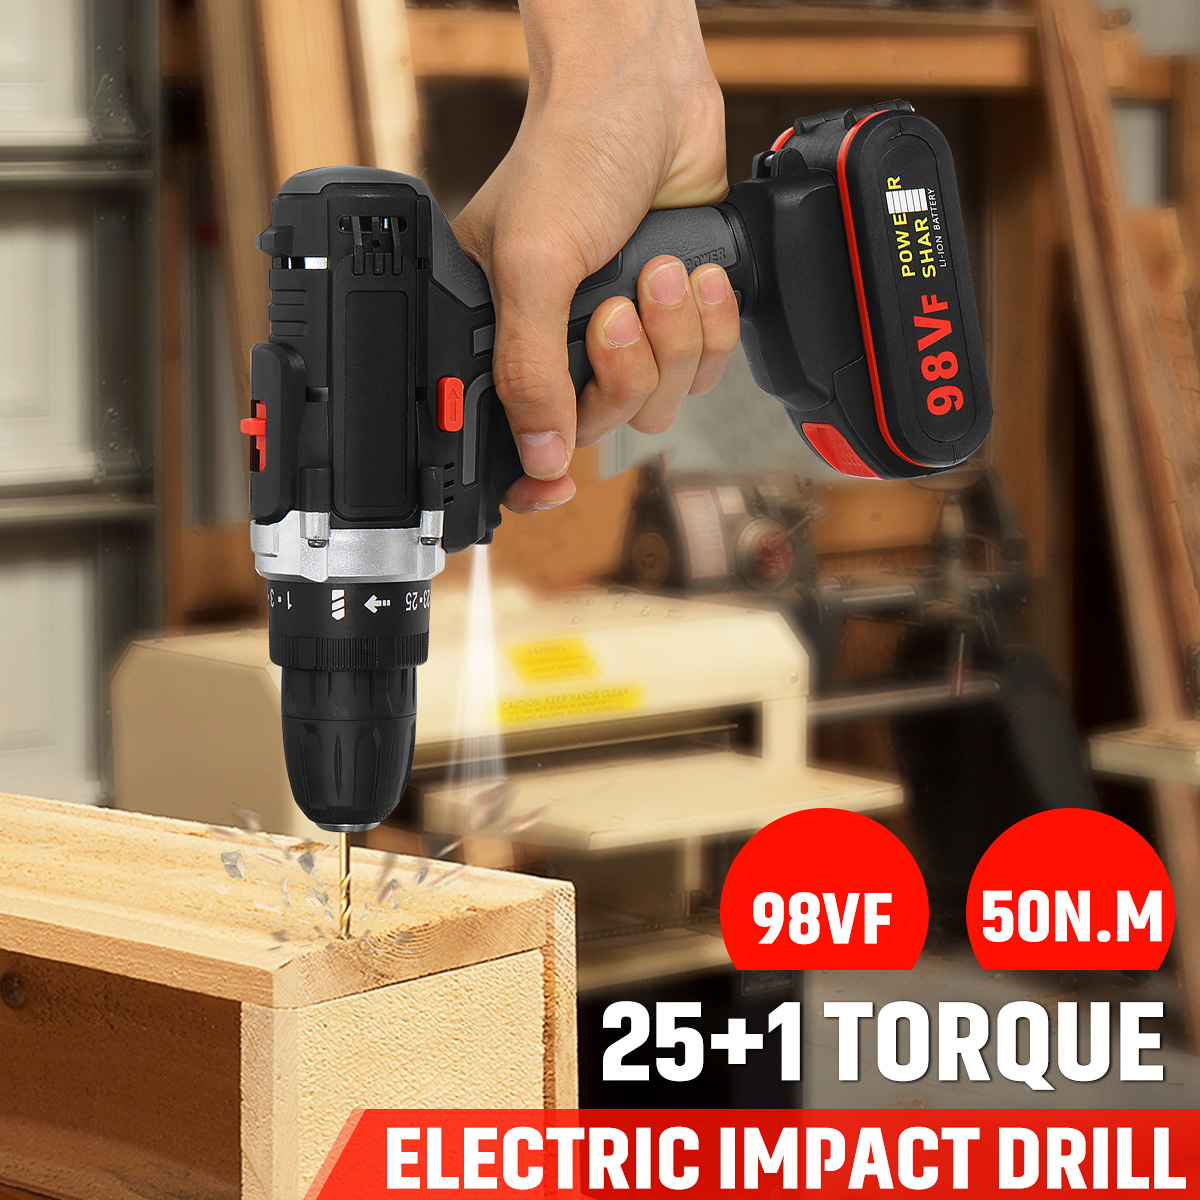 98VF-Cordless-Electric-Impact-Drill-Screwdriver-251-Torque-Rechargeable-Household-Screwdriver-1764622-1